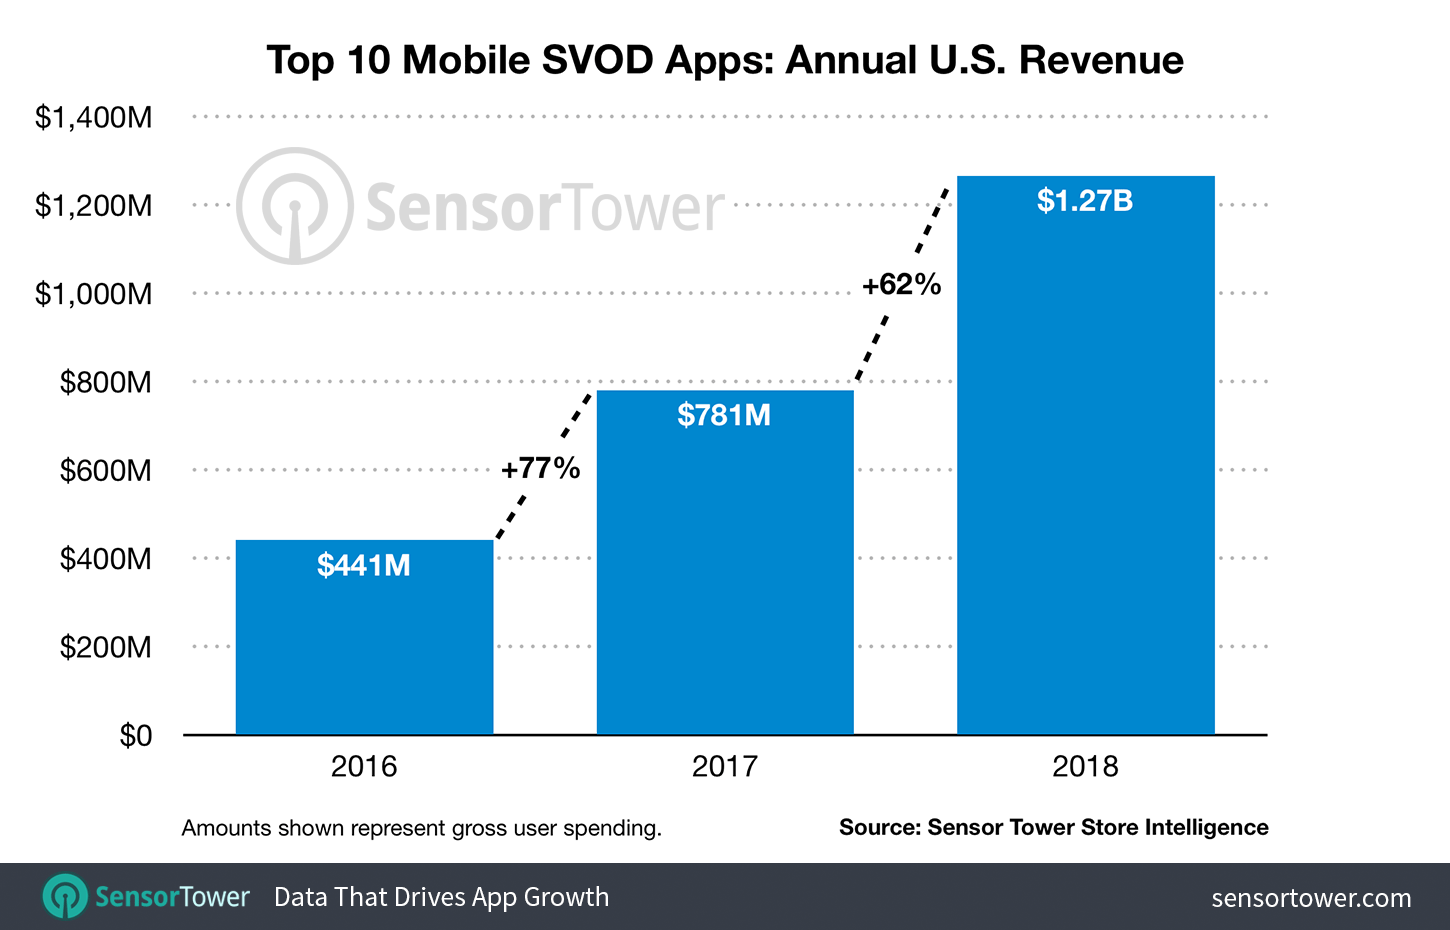 Annual Revenue for the Top 10 U.S. SVOD Apps for 2016, 2017, and 2018